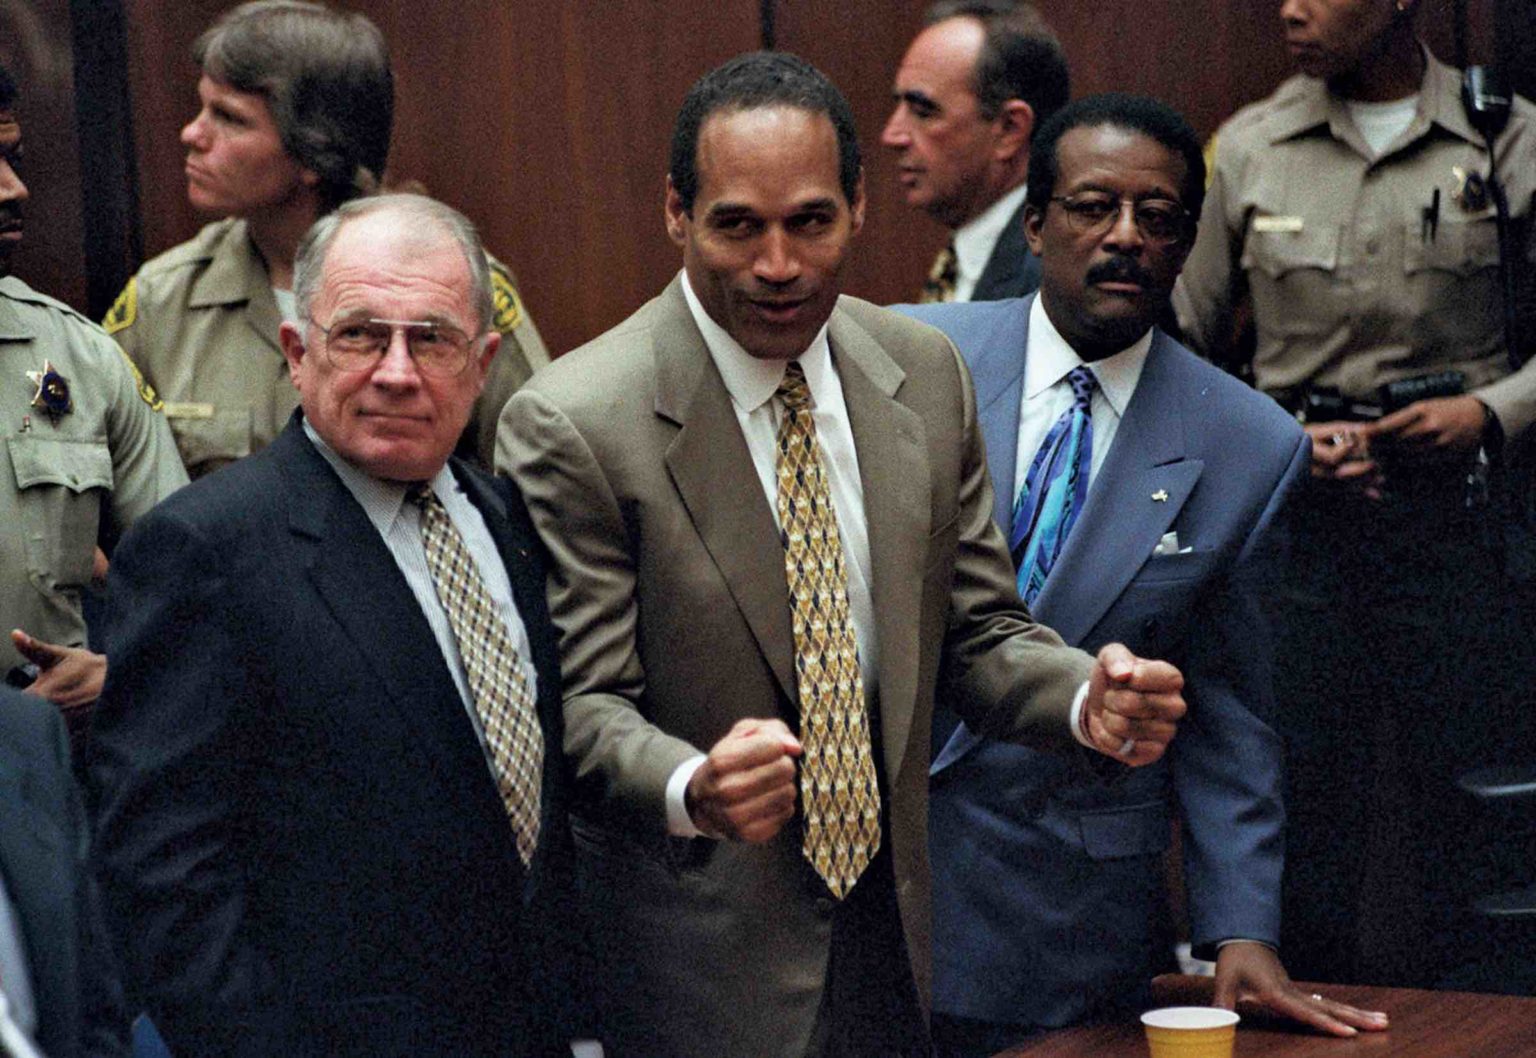 If you’re thinking about bingeing 'American Crime Story: The People vs O.J. Simpson' during quarantine, then here’s what you need to know.